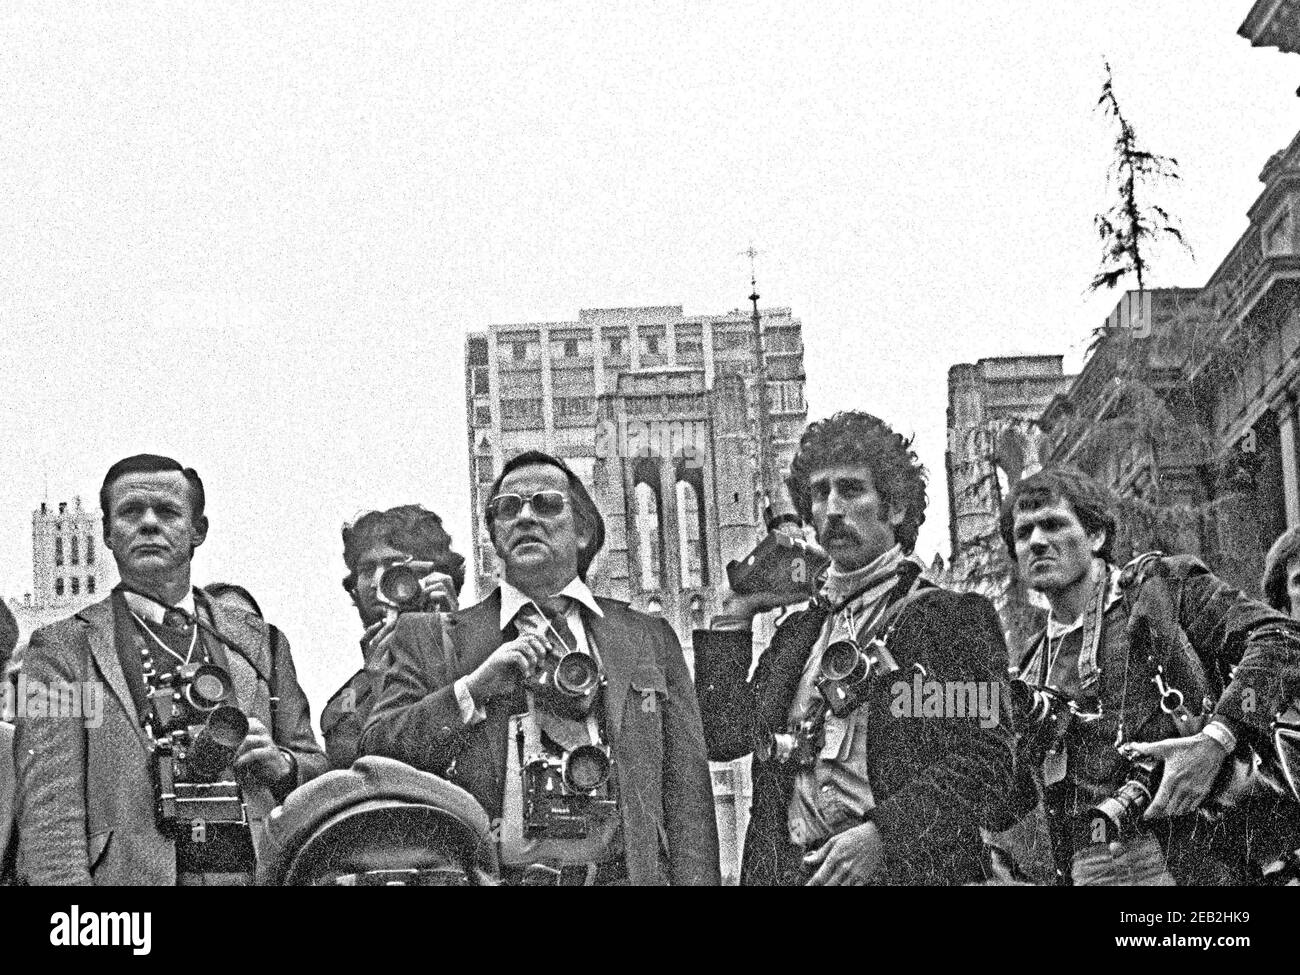 News photographers cover a demonstration in San Francisco against American involvement in Angola.  front row,  L to R; Gordan Stone, Sal Beder, Mthew Nathons, Richard Chatcuff.  In 1970s Stock Photo